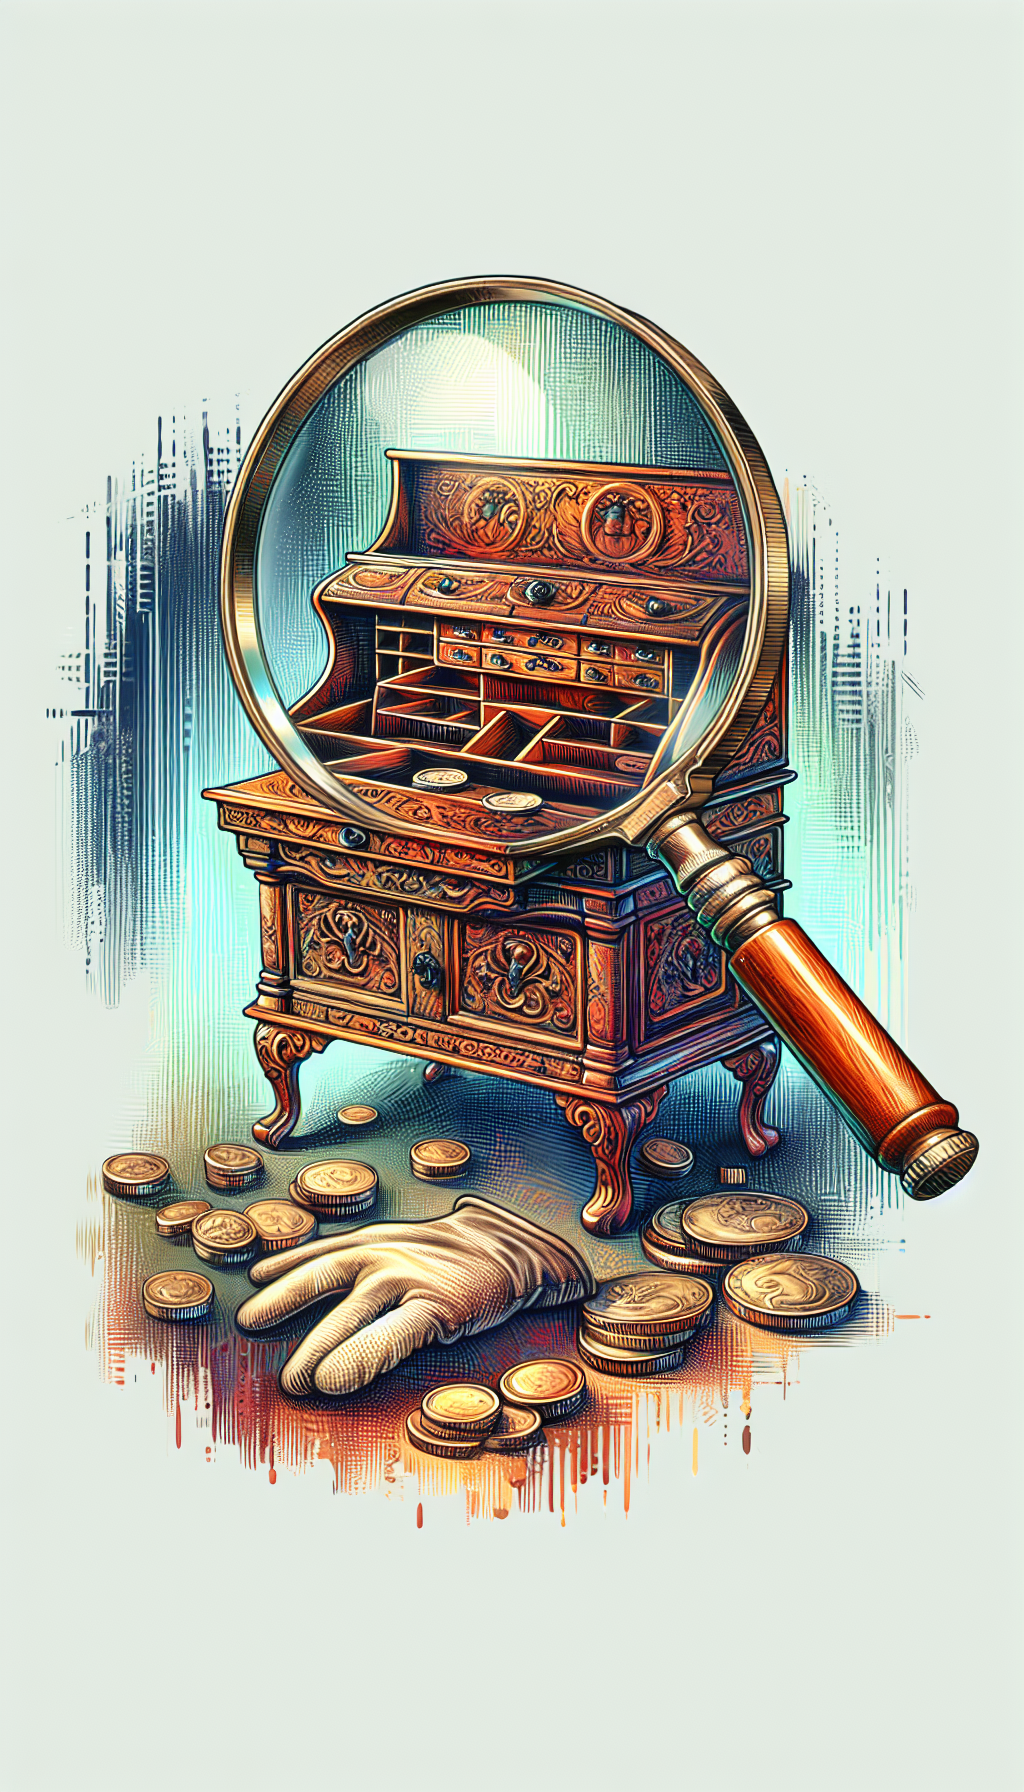 An illustration displays a half-open antique roll top desk with a magnifying glass hovering over it, revealing intricate carvings and the patina of age. Coins and appraiser's gloves lie scattered on the desk surface, hinting at the evaluation of its value. The artwork shifts styles from detailed realism under the glass to impressionistic strokes on the outer edges.